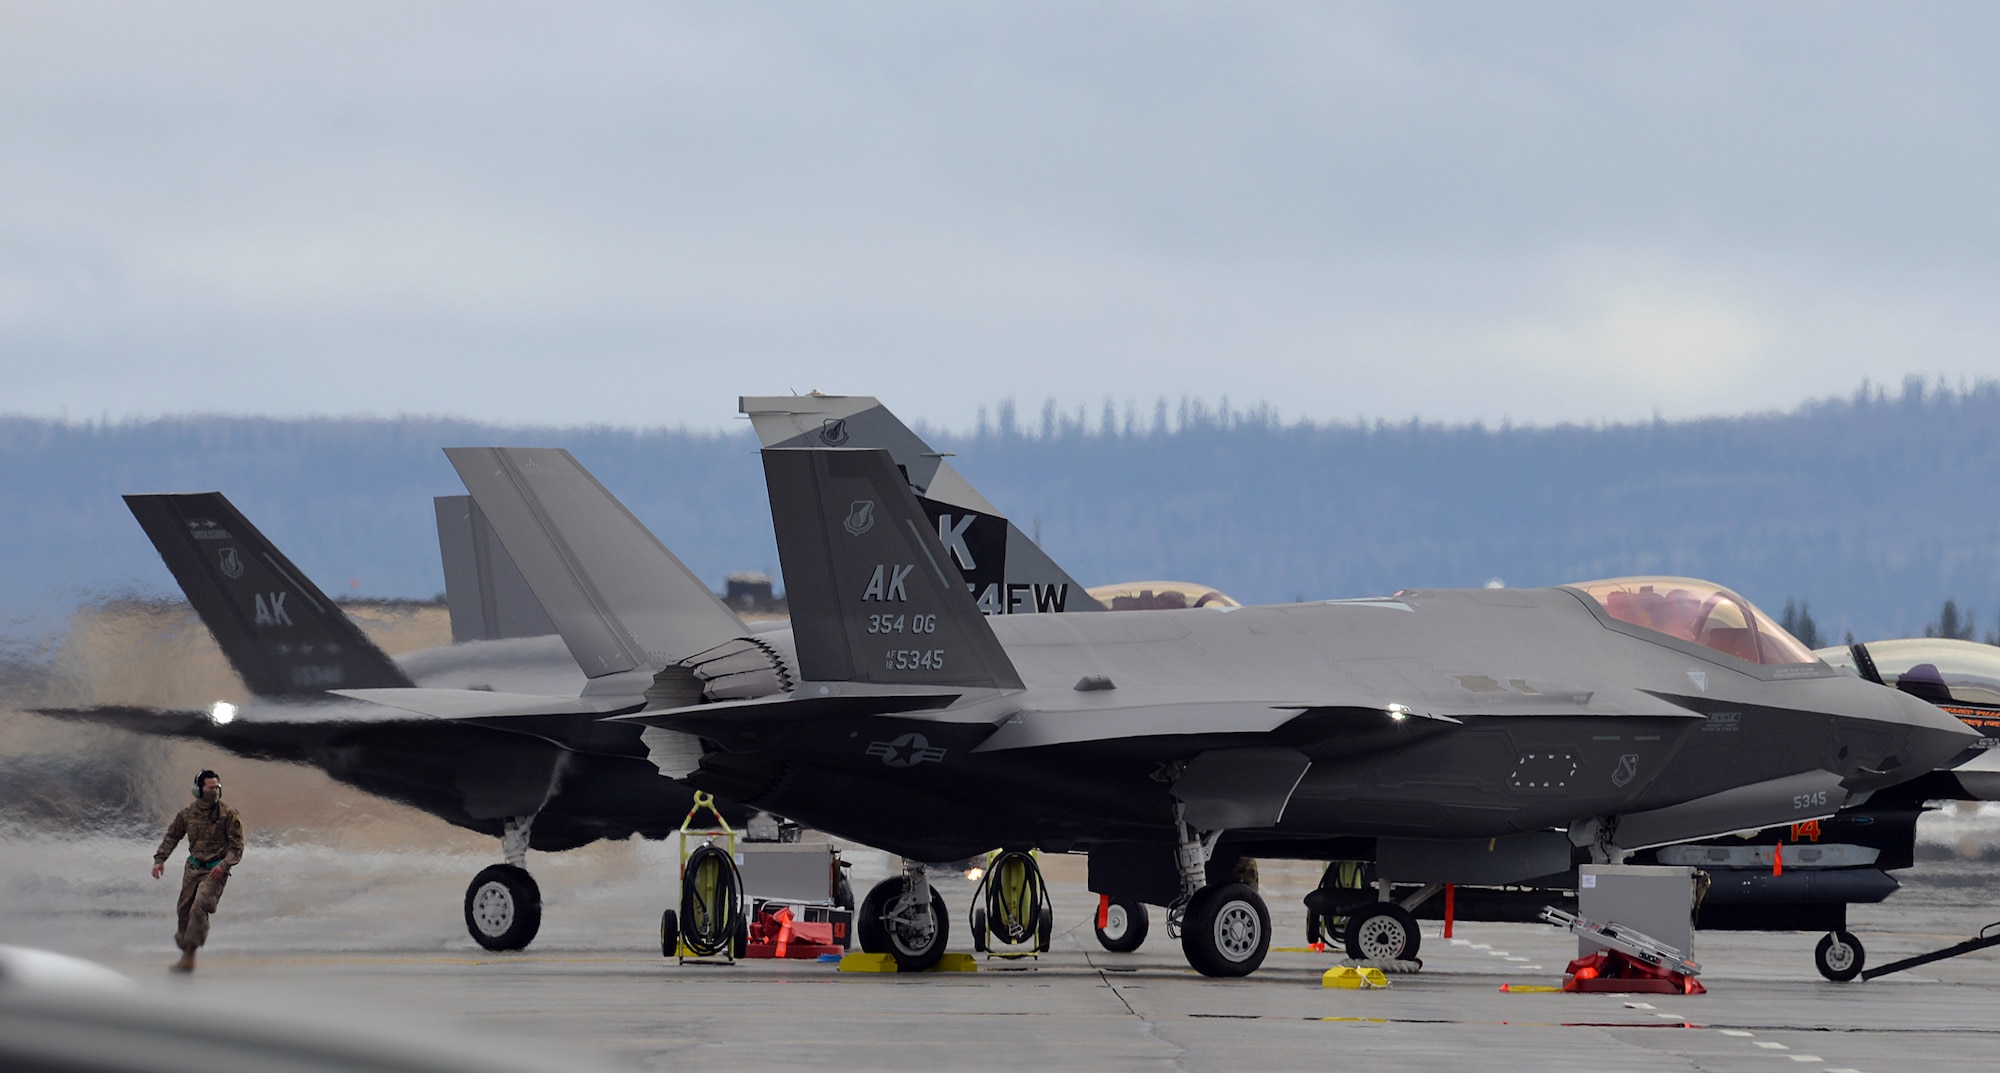 U.S. Air Force Staff Sgt. Steven Krutke, an F-35 avionics system craftsman with the 356th Aircraft Maintenance Unit (AMU), prepares one of the first F-35A Lightning II fifth-generation aircraft assigned to the 356th Fighter Squadron after its arrival at Eielson Air Force Base, Alaska, April 21, 2020.